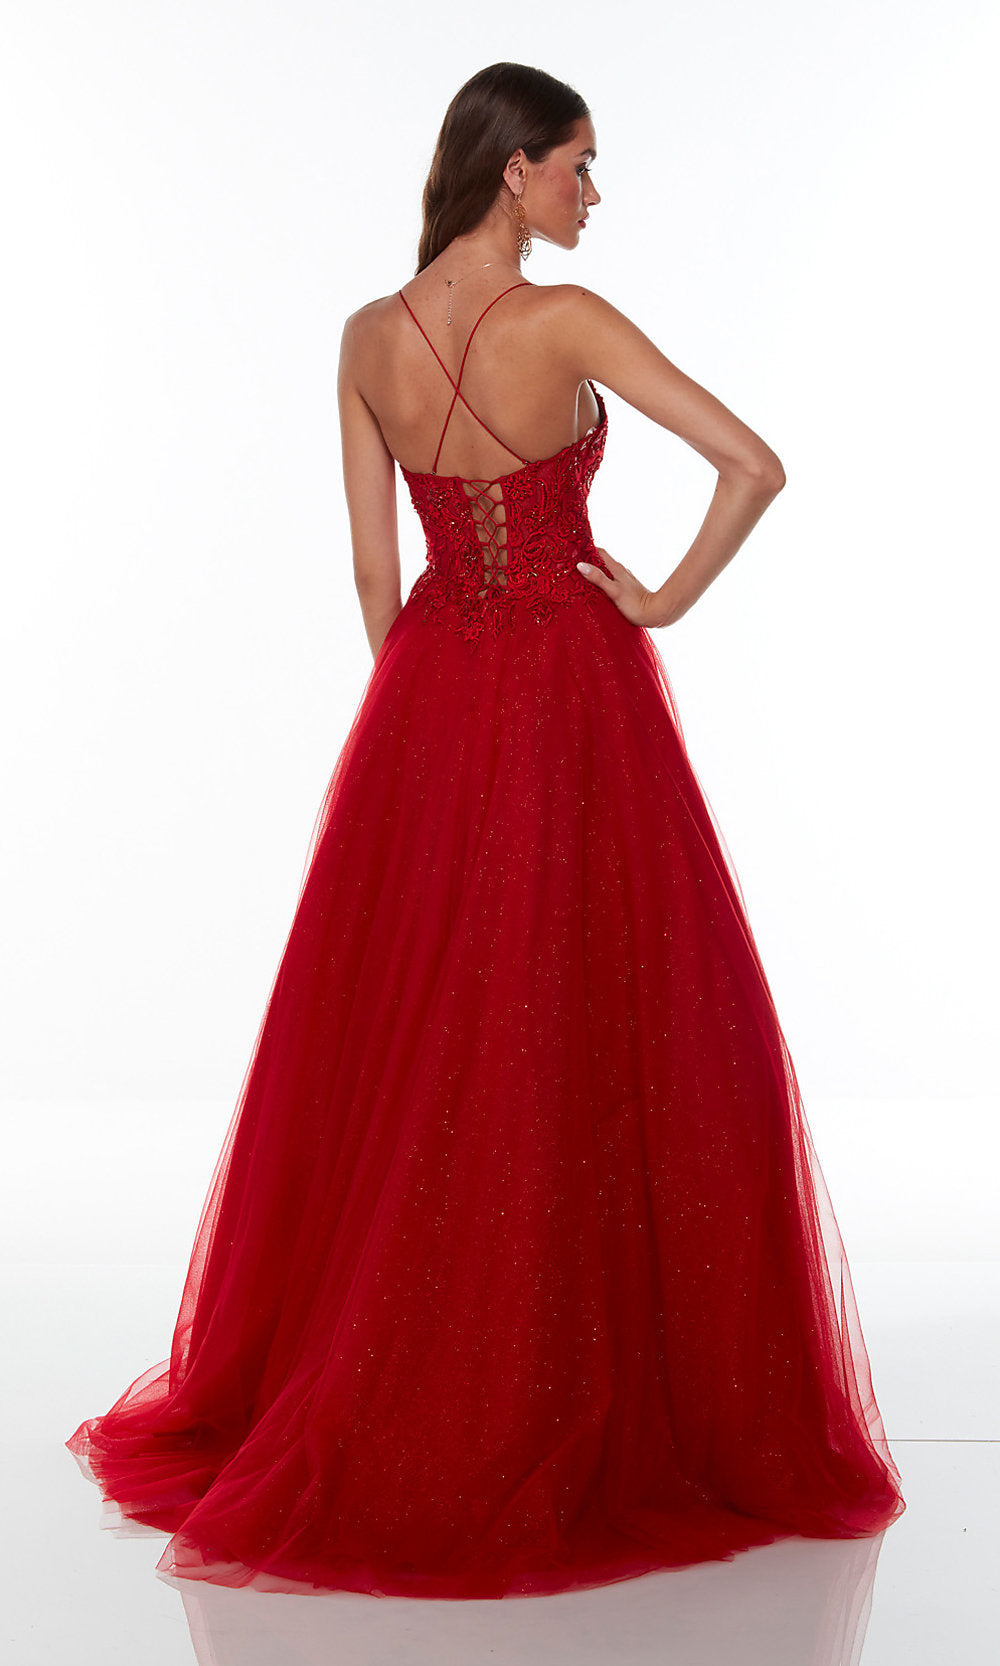 Handmade Puffy Red Quinceanera Ball Gown With Beaded Crystal Flowers Glitter  Tulle Cap And Short Sleeves Perfect For Sweet 16, Prom, And Graduation  Womens Style From Lovemydress, $85.43 | DHgate.Com